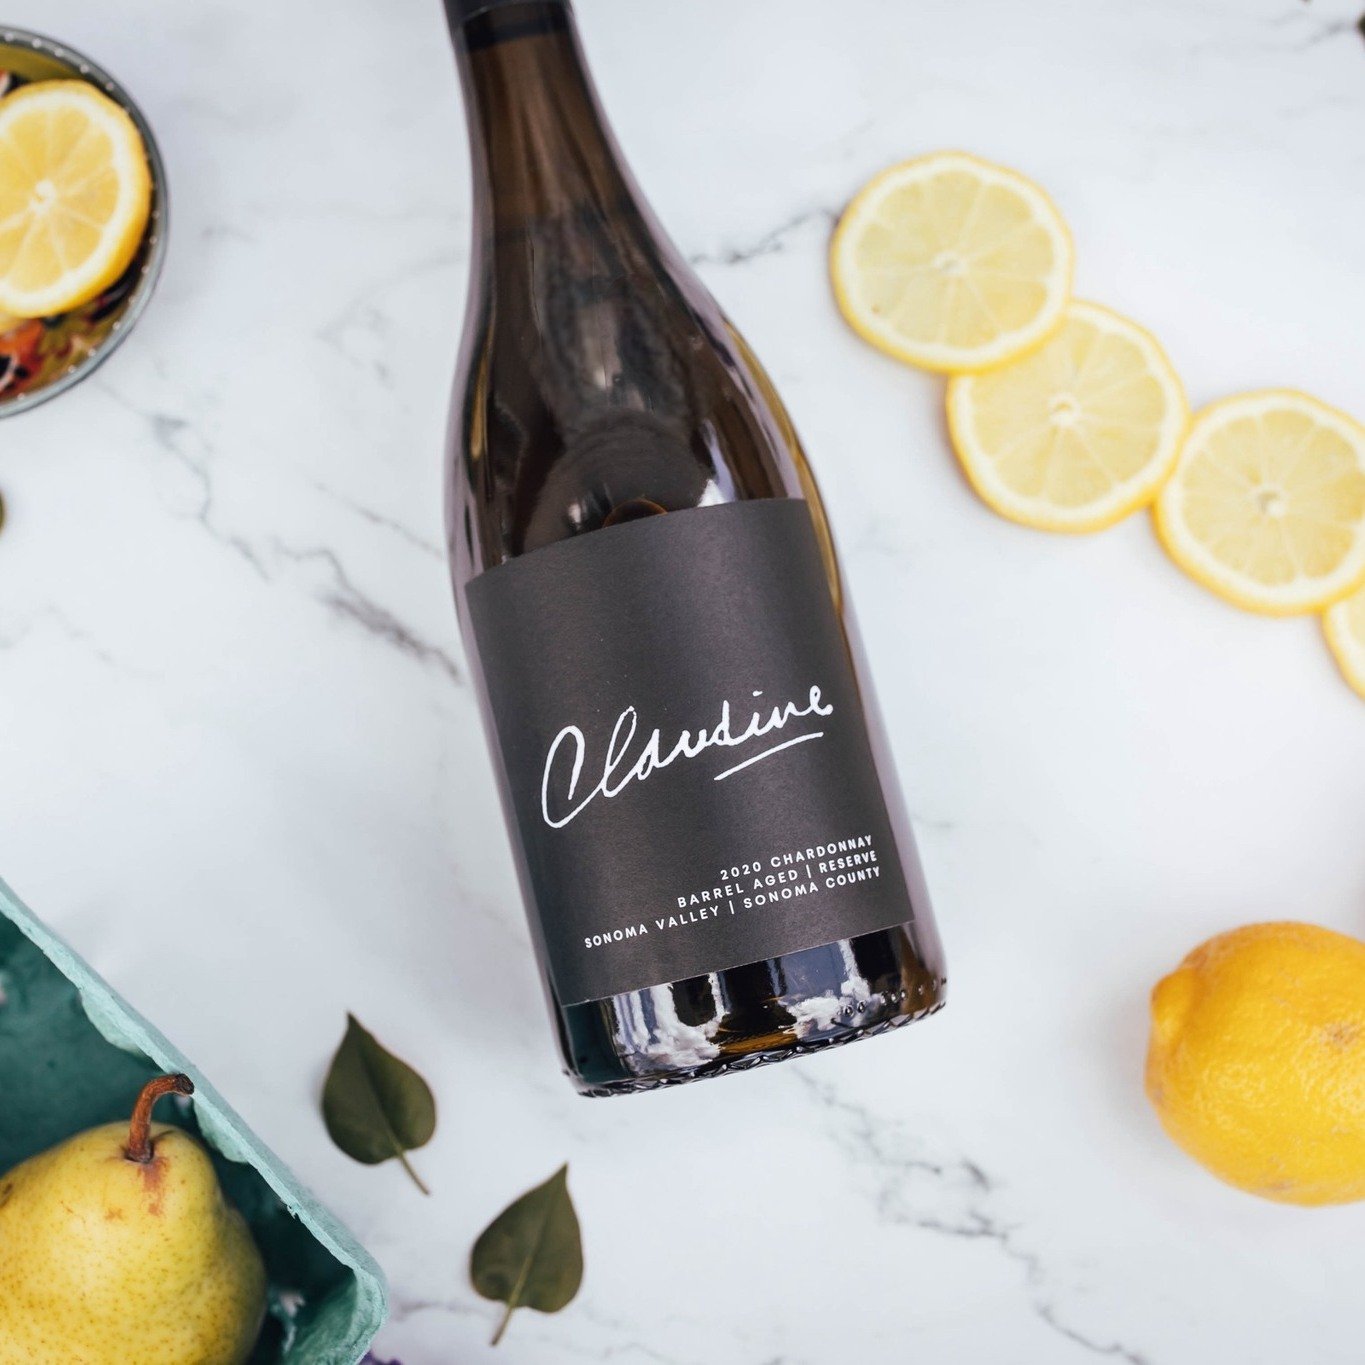 2020 Reserve Chardonnay: Our Tasting Notes

The vibrant, but not overly done color of this wine lets you know it has spent some time in oak. The nose hints at summer apple and pear with a touch of floral. She boasts an elegant acidity and a smooth, b